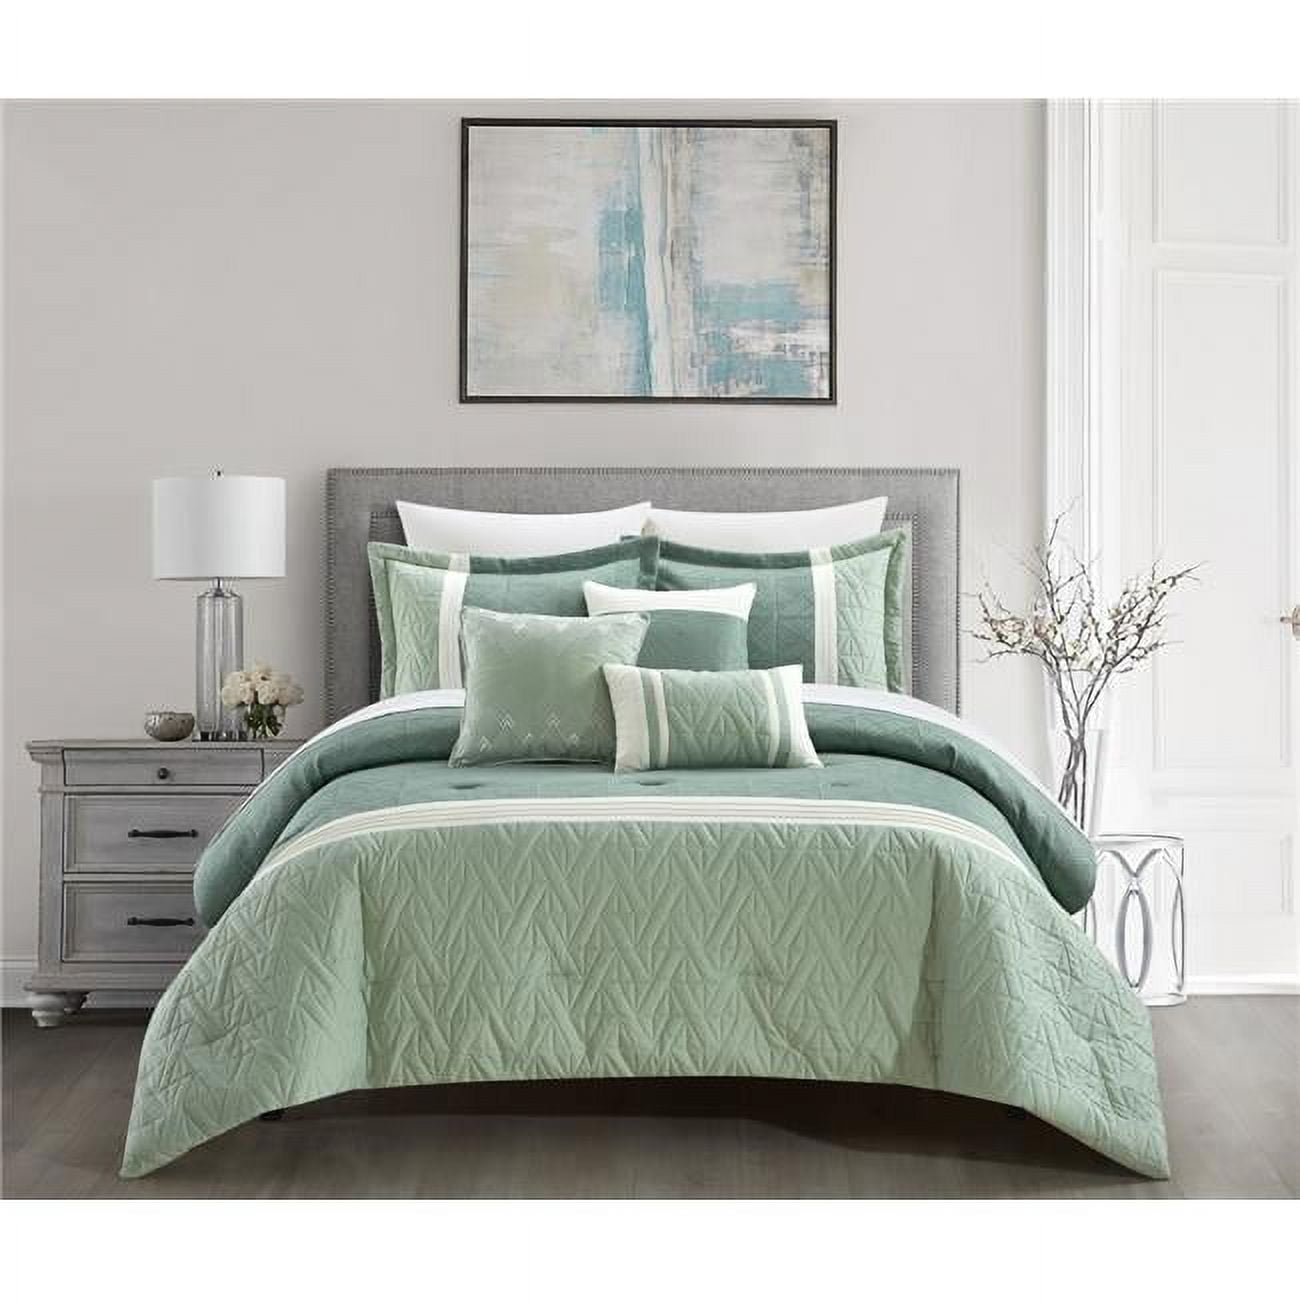 BCS24701-BIB-US Maci Jacquard Woven Geometric Design Pleated Quilted Details Bed in A Bag Bedding Comforter Set, Green - King Size - 10 Piece -  Chic Home